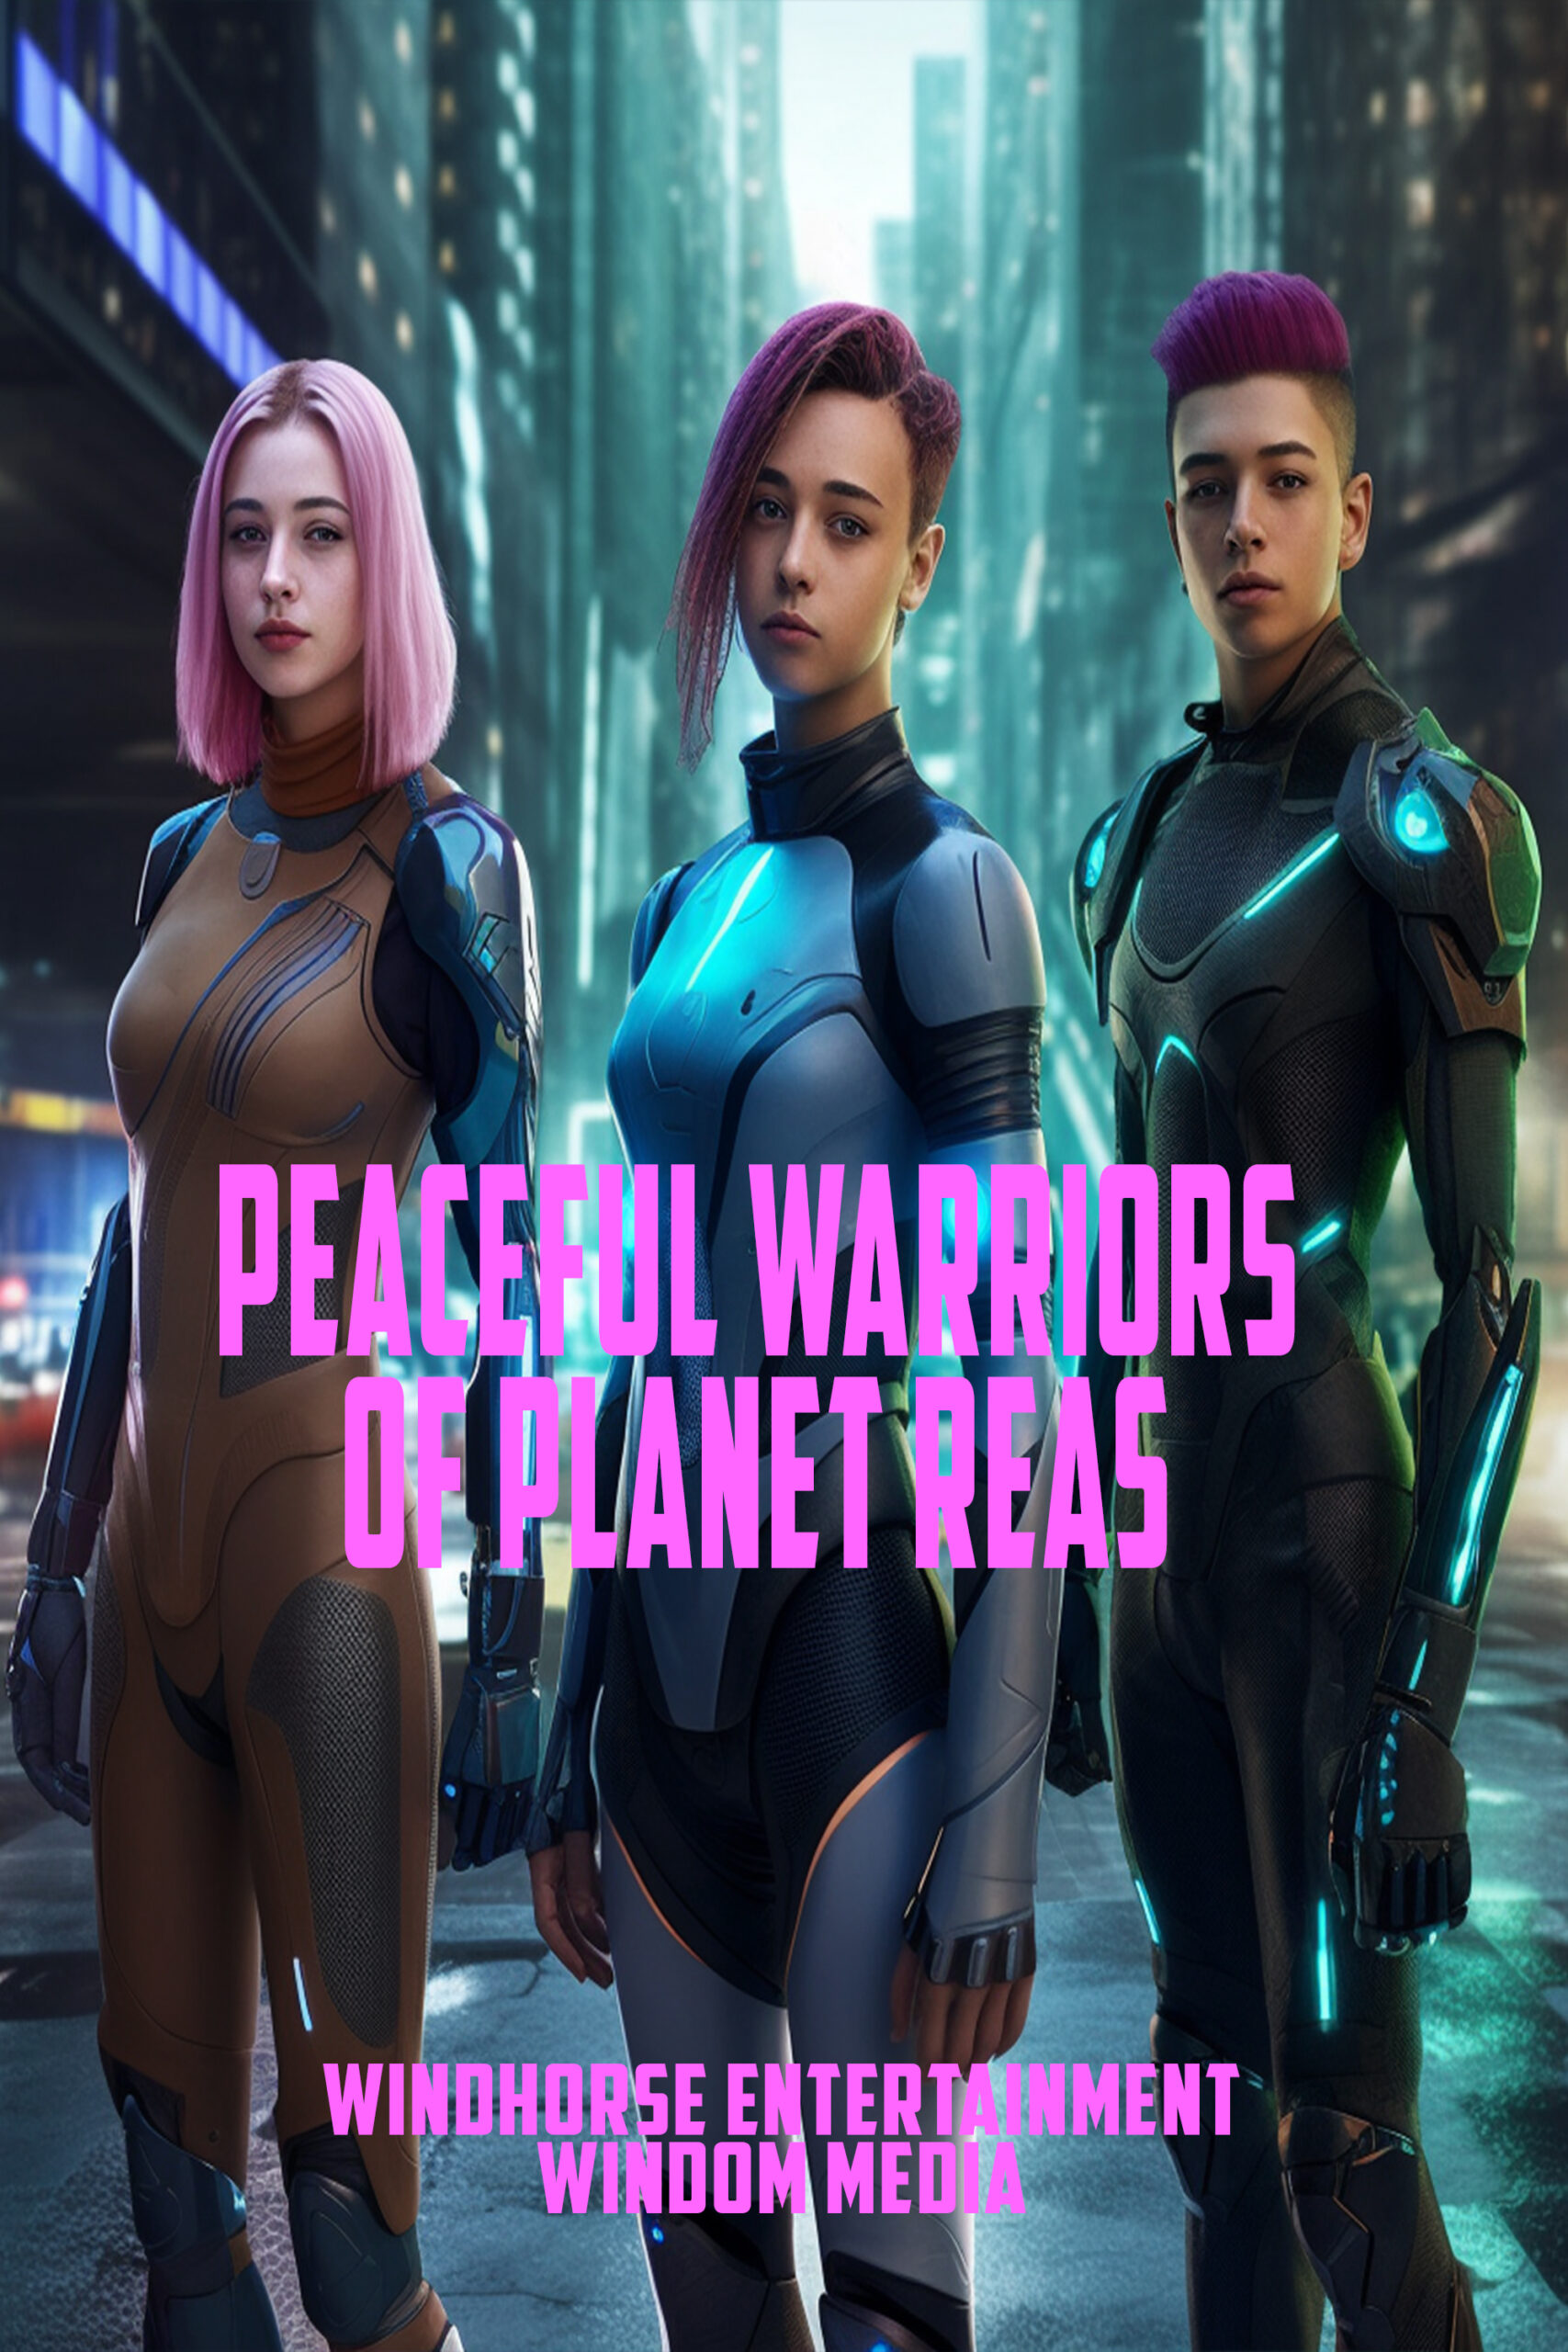 Peaceful Warriors Of Planet Reas